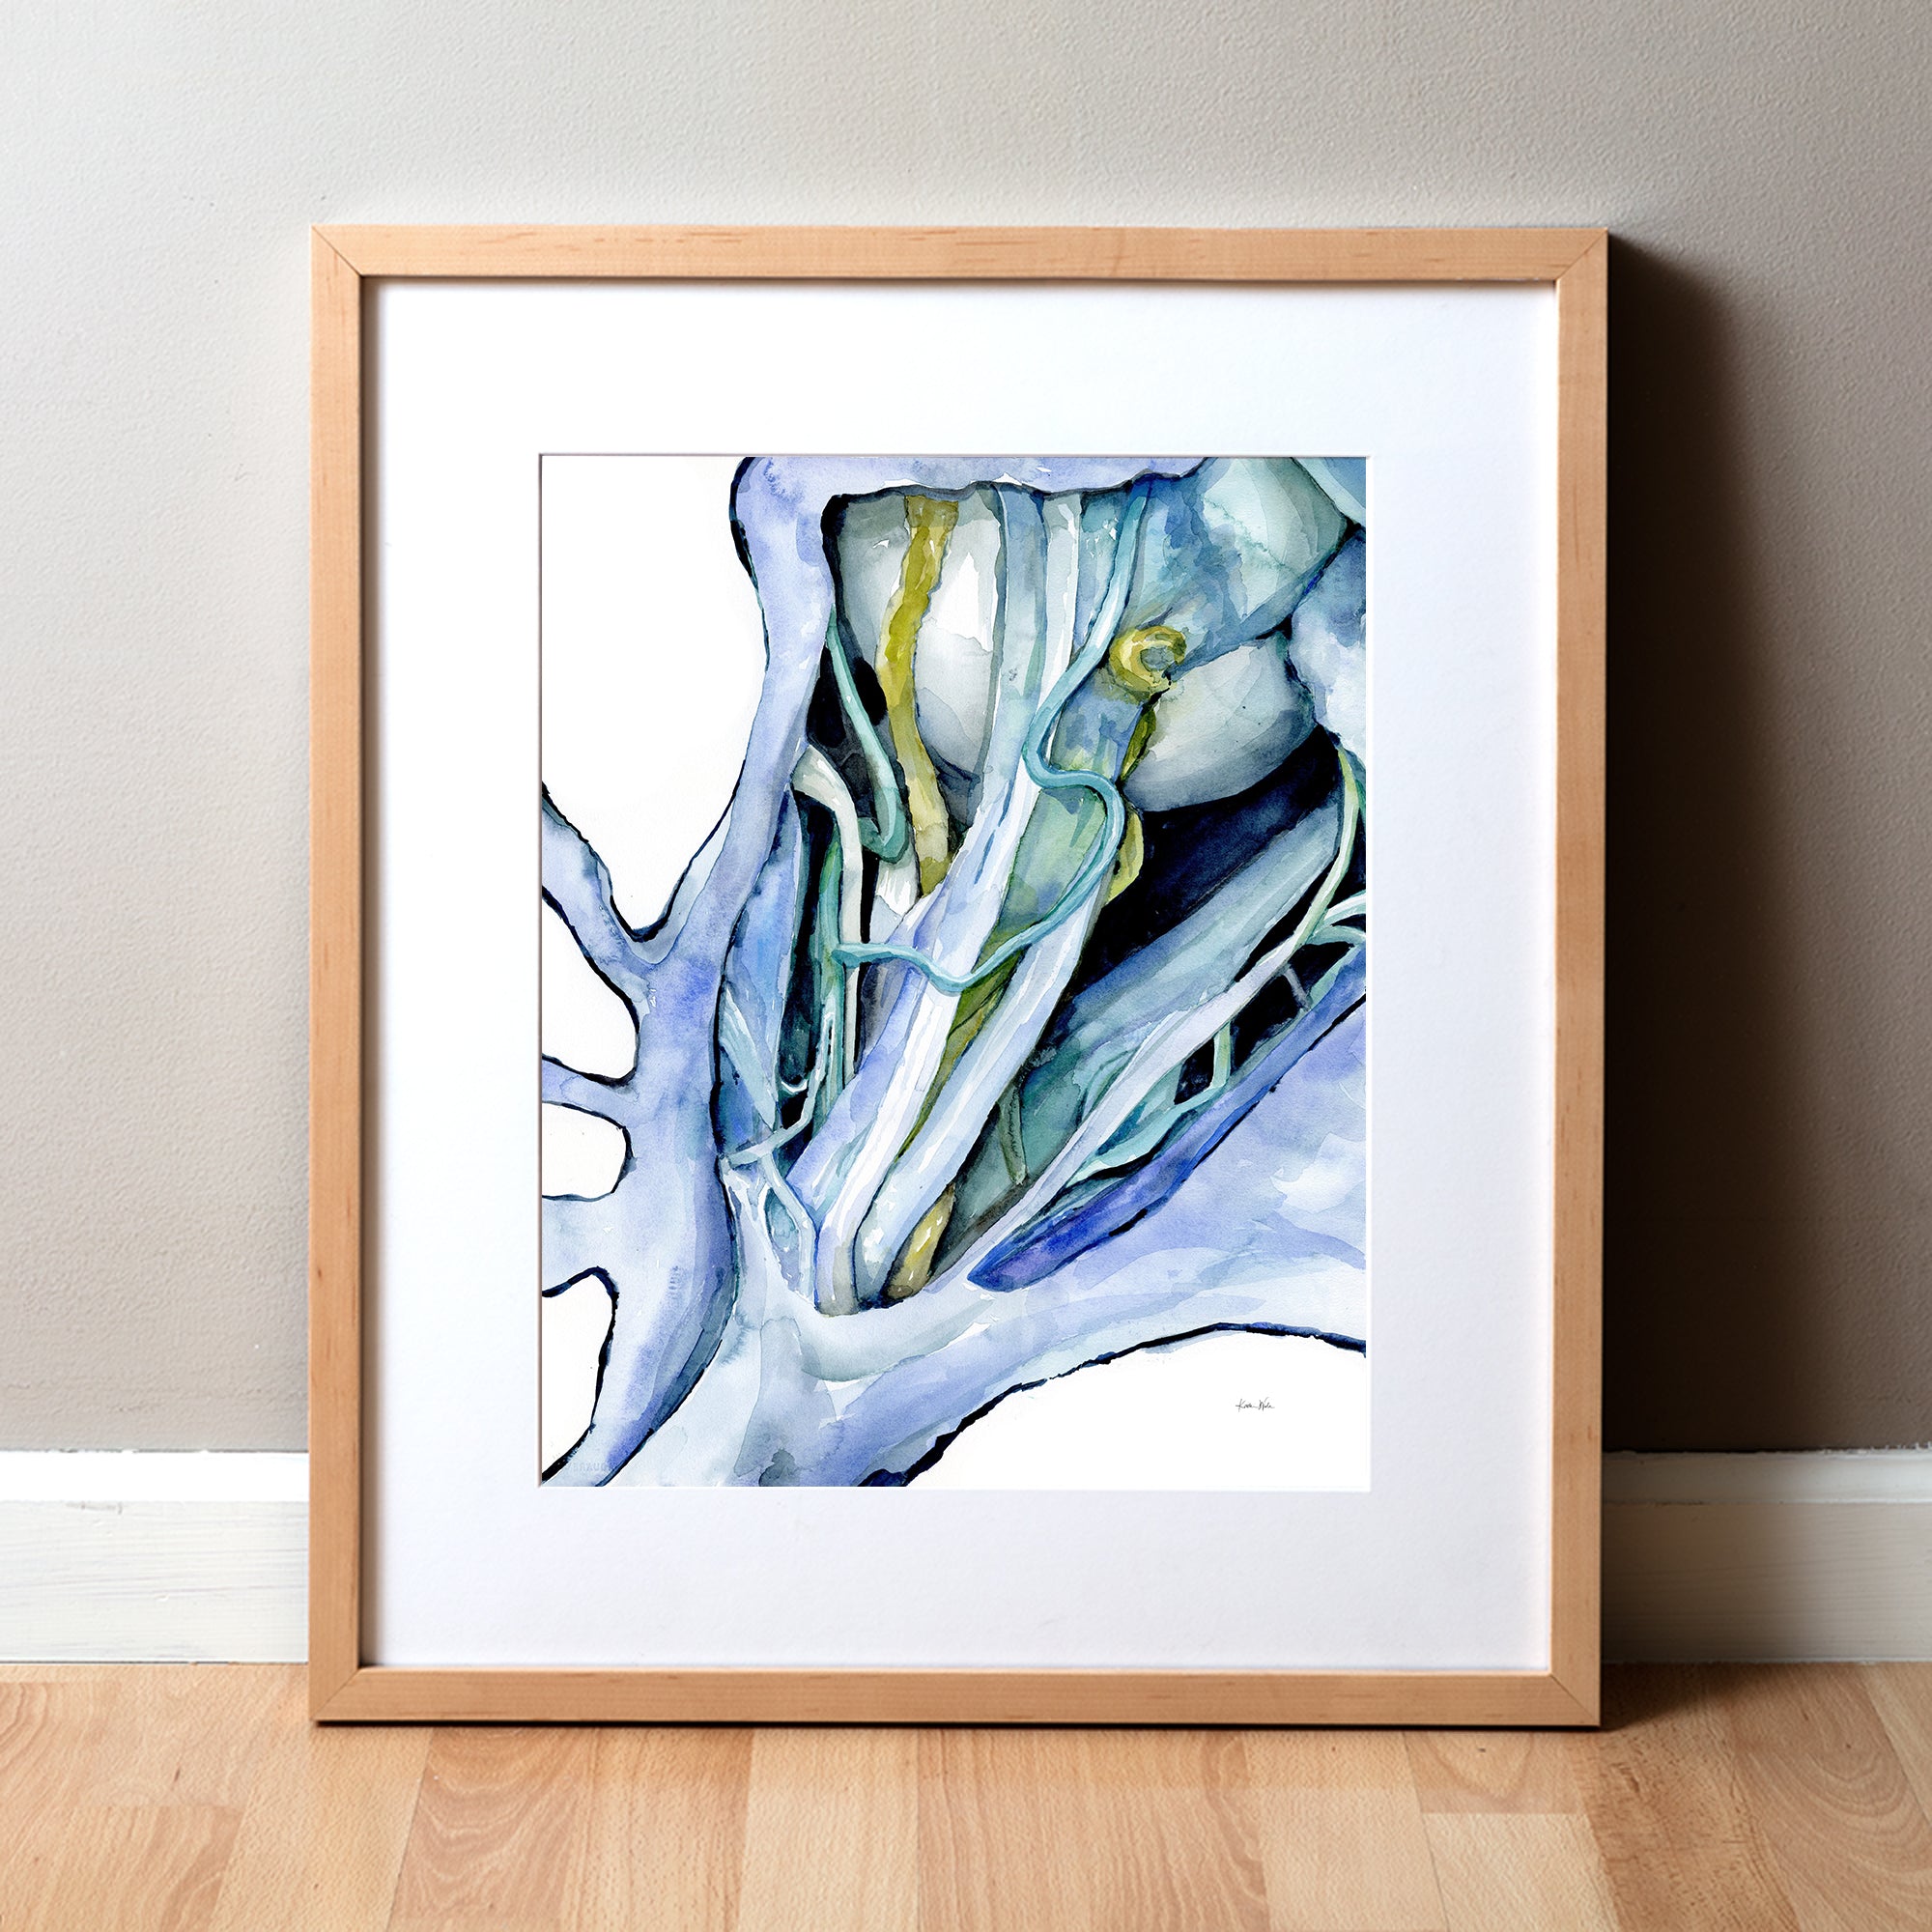 Framed watercolor painting of a dissection showing the orbital nerves and surrounding anatomy in blues, teals, and greens.